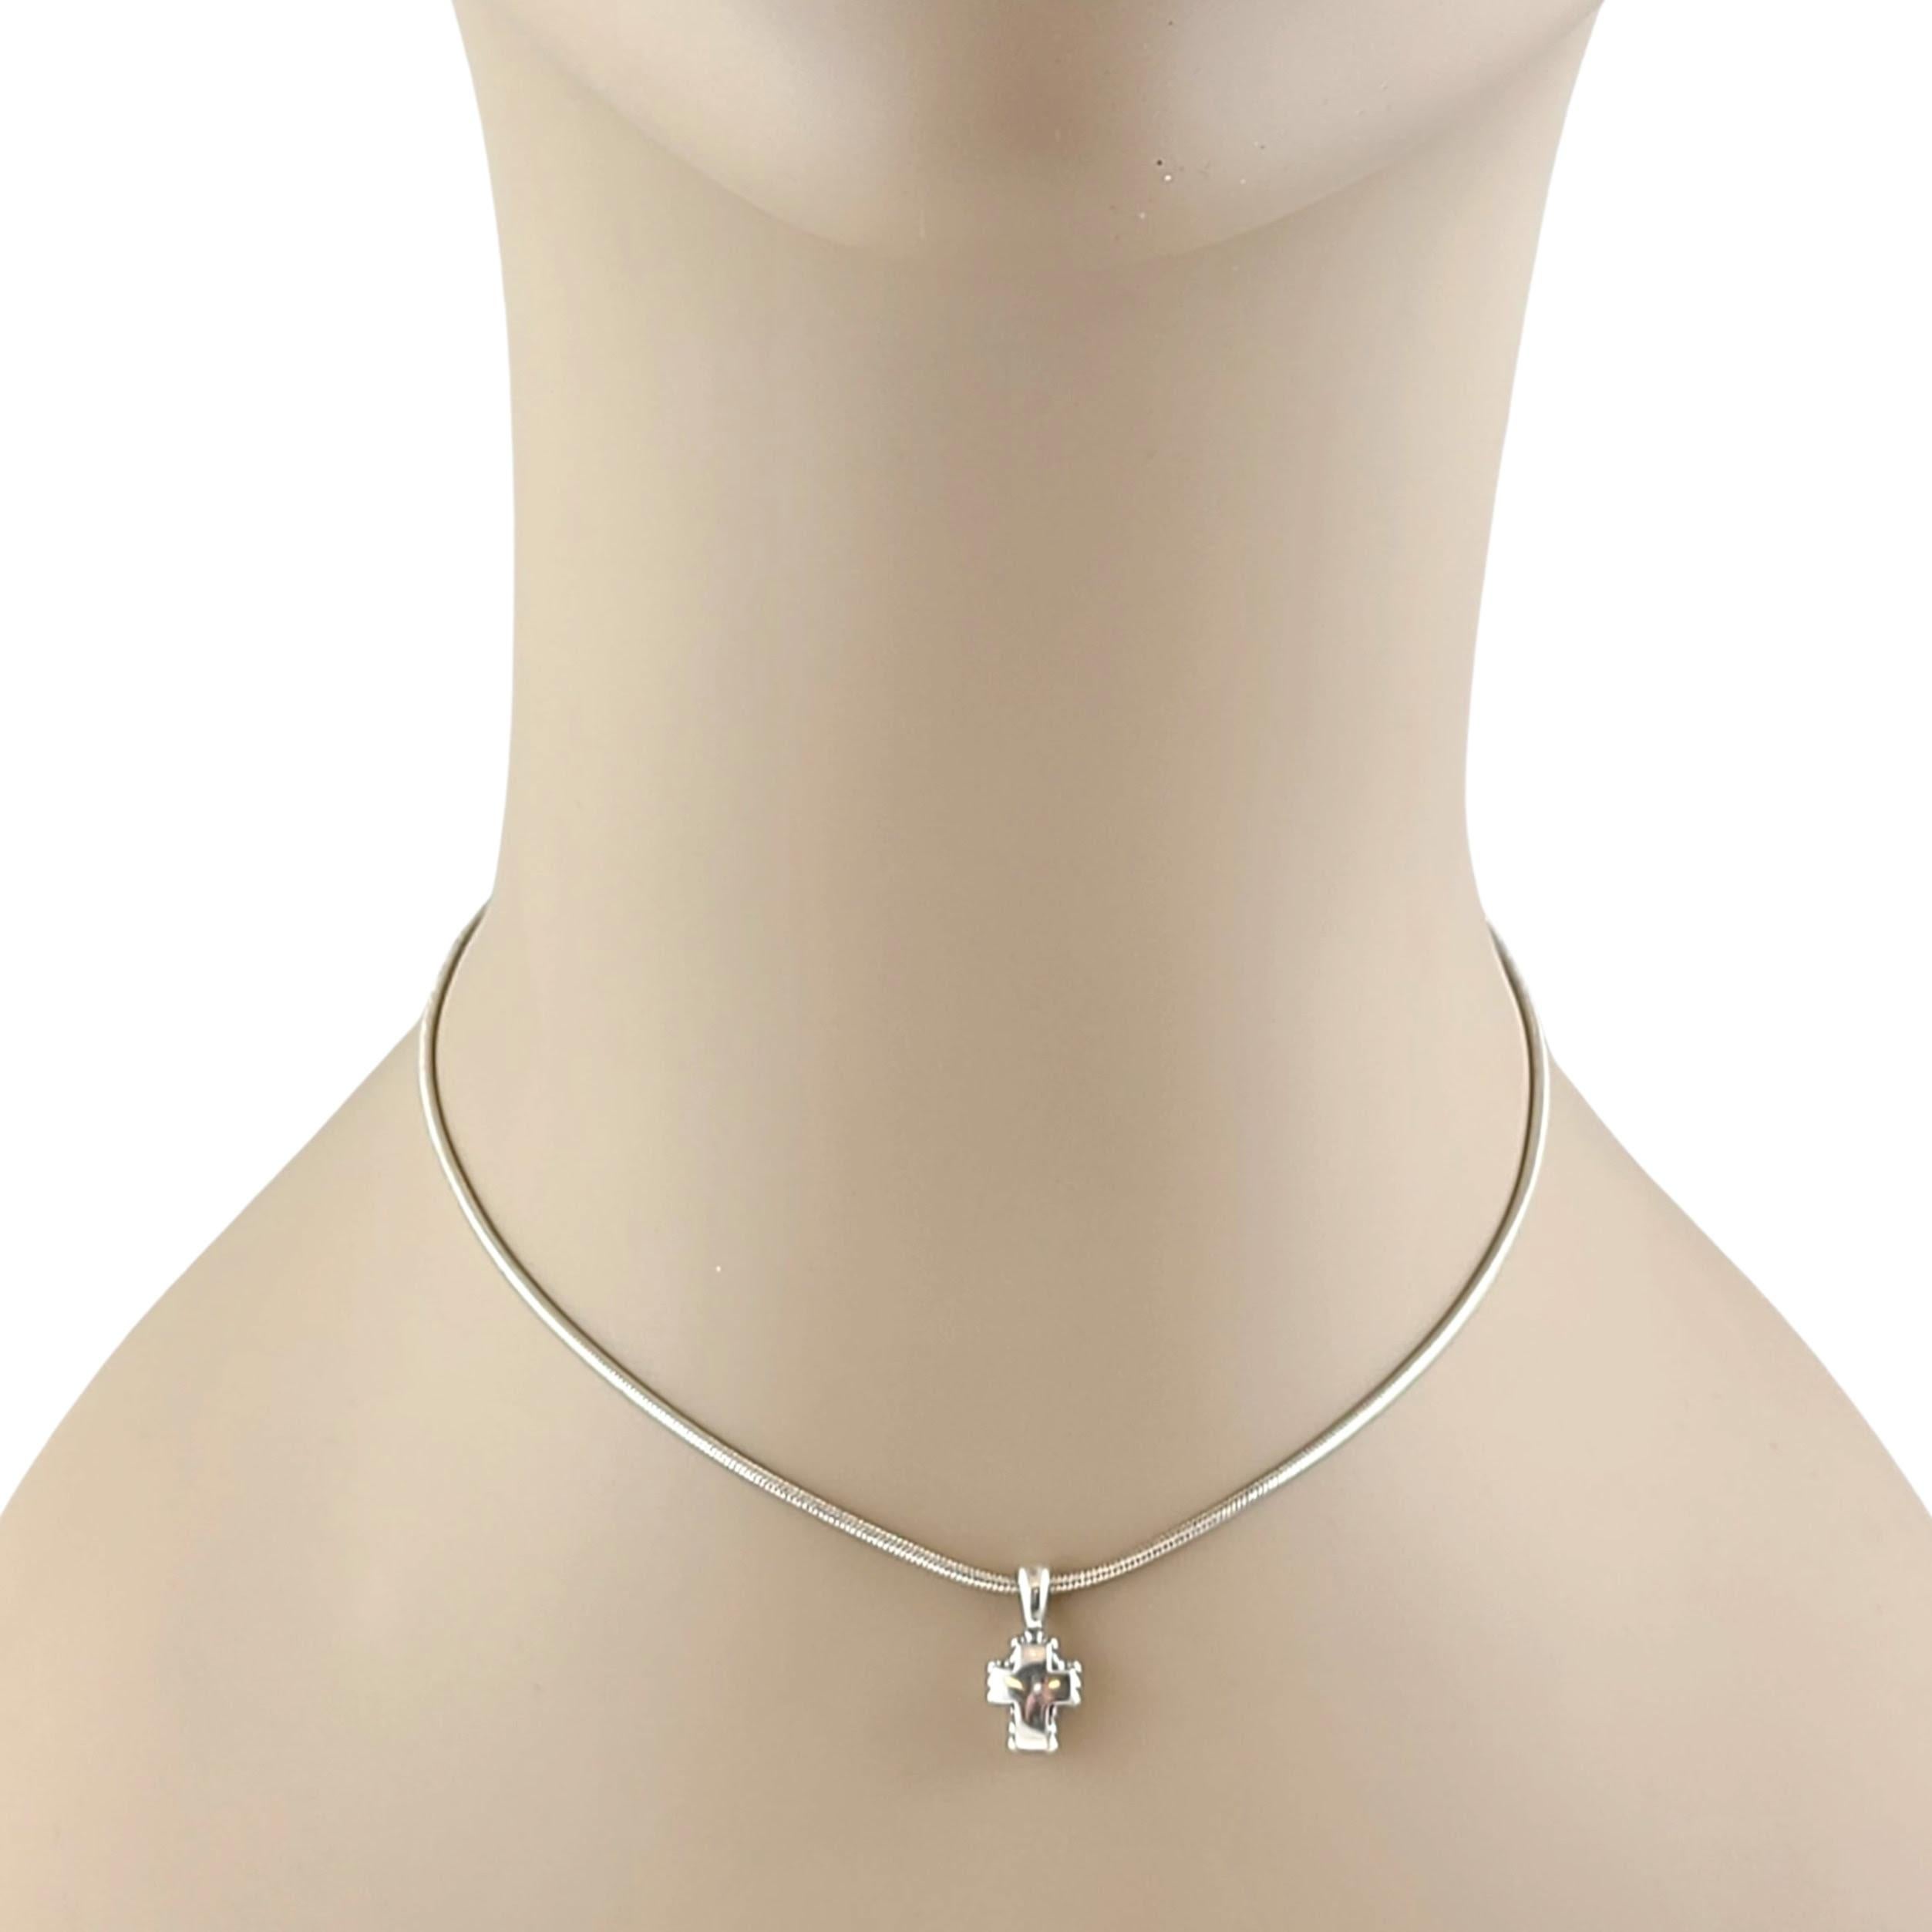 Lagos Caviar Sterling Silver Cross Pendant with Chain 2